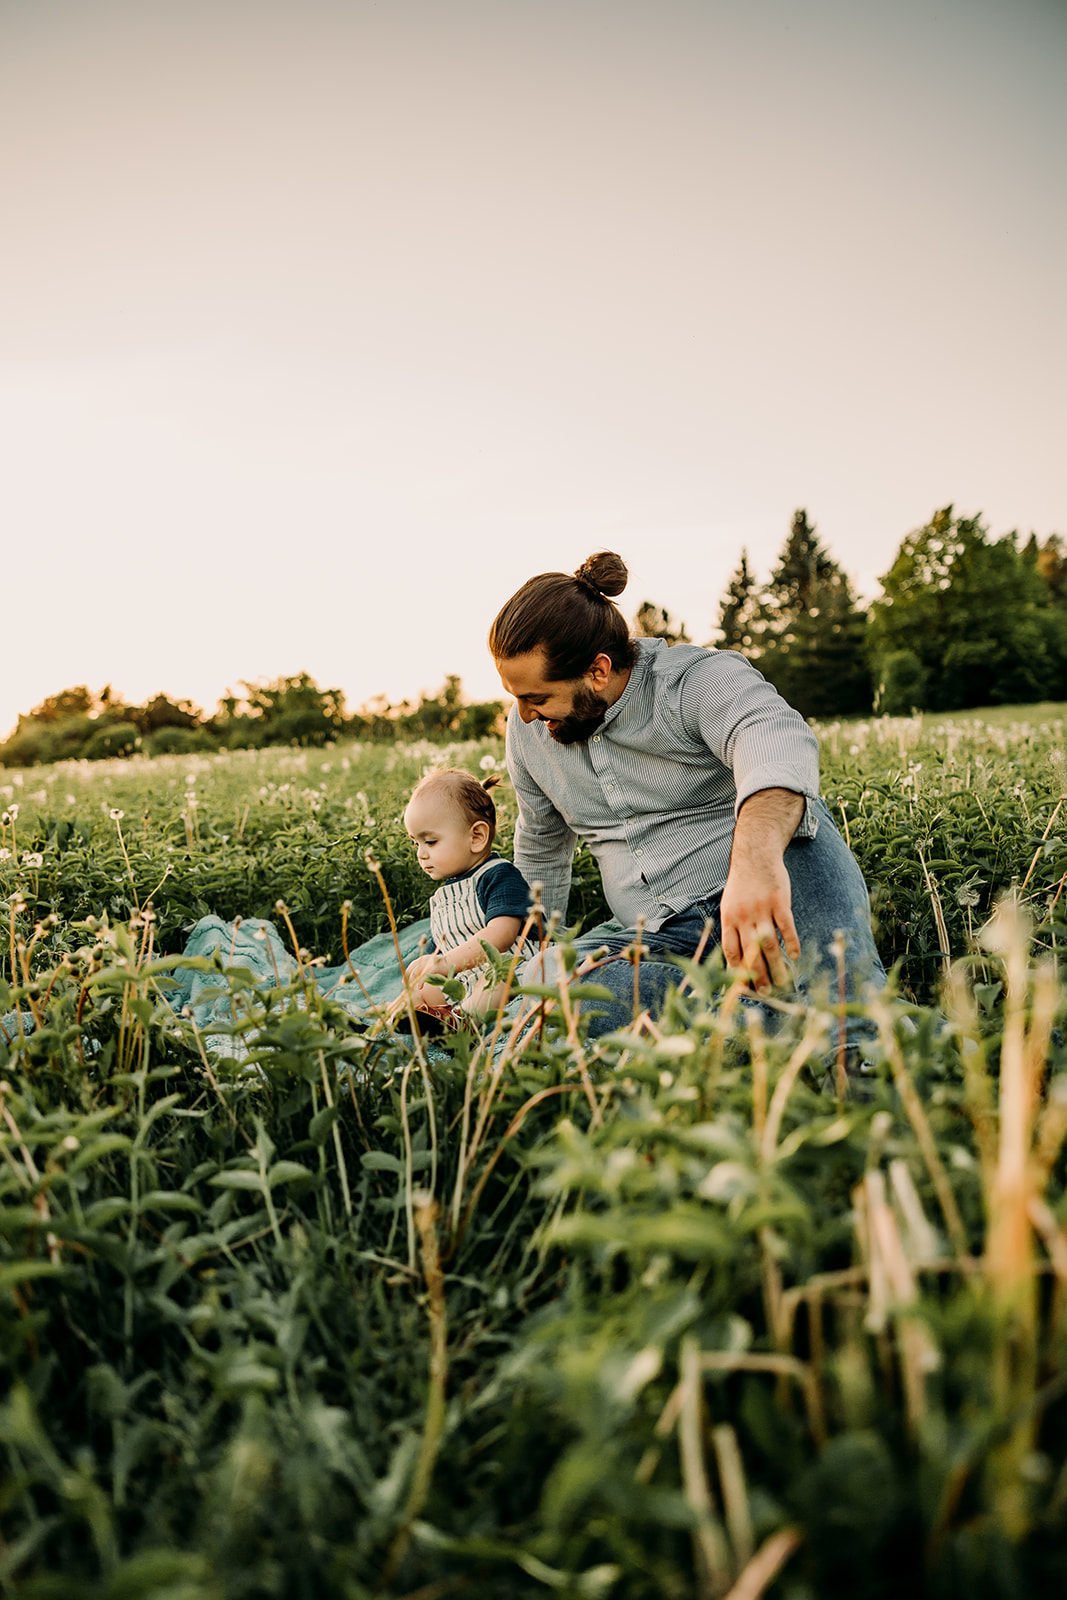 Natural beauty and family joy captured in Ottawa's fields